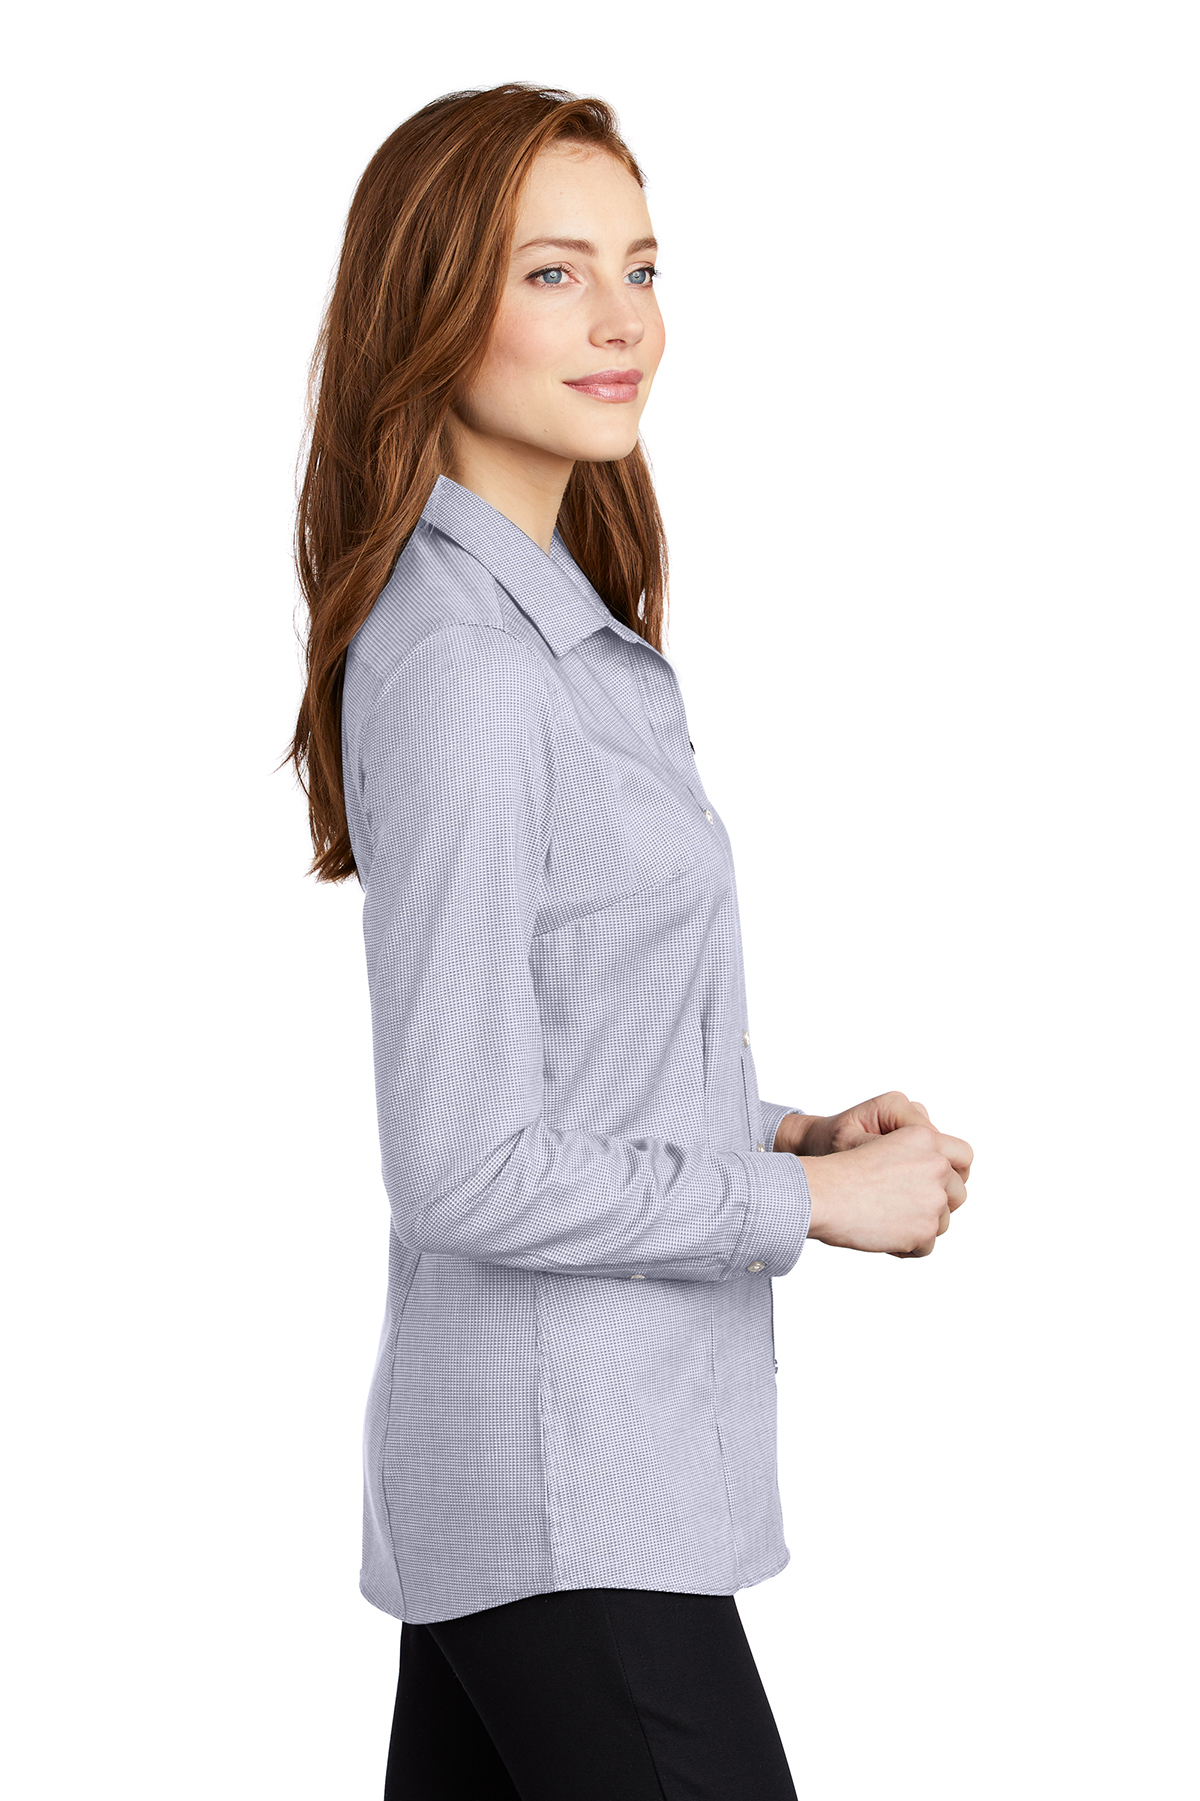 Pincheck Ladies Authority Port Care Port Authority Product | Shirt Easy |